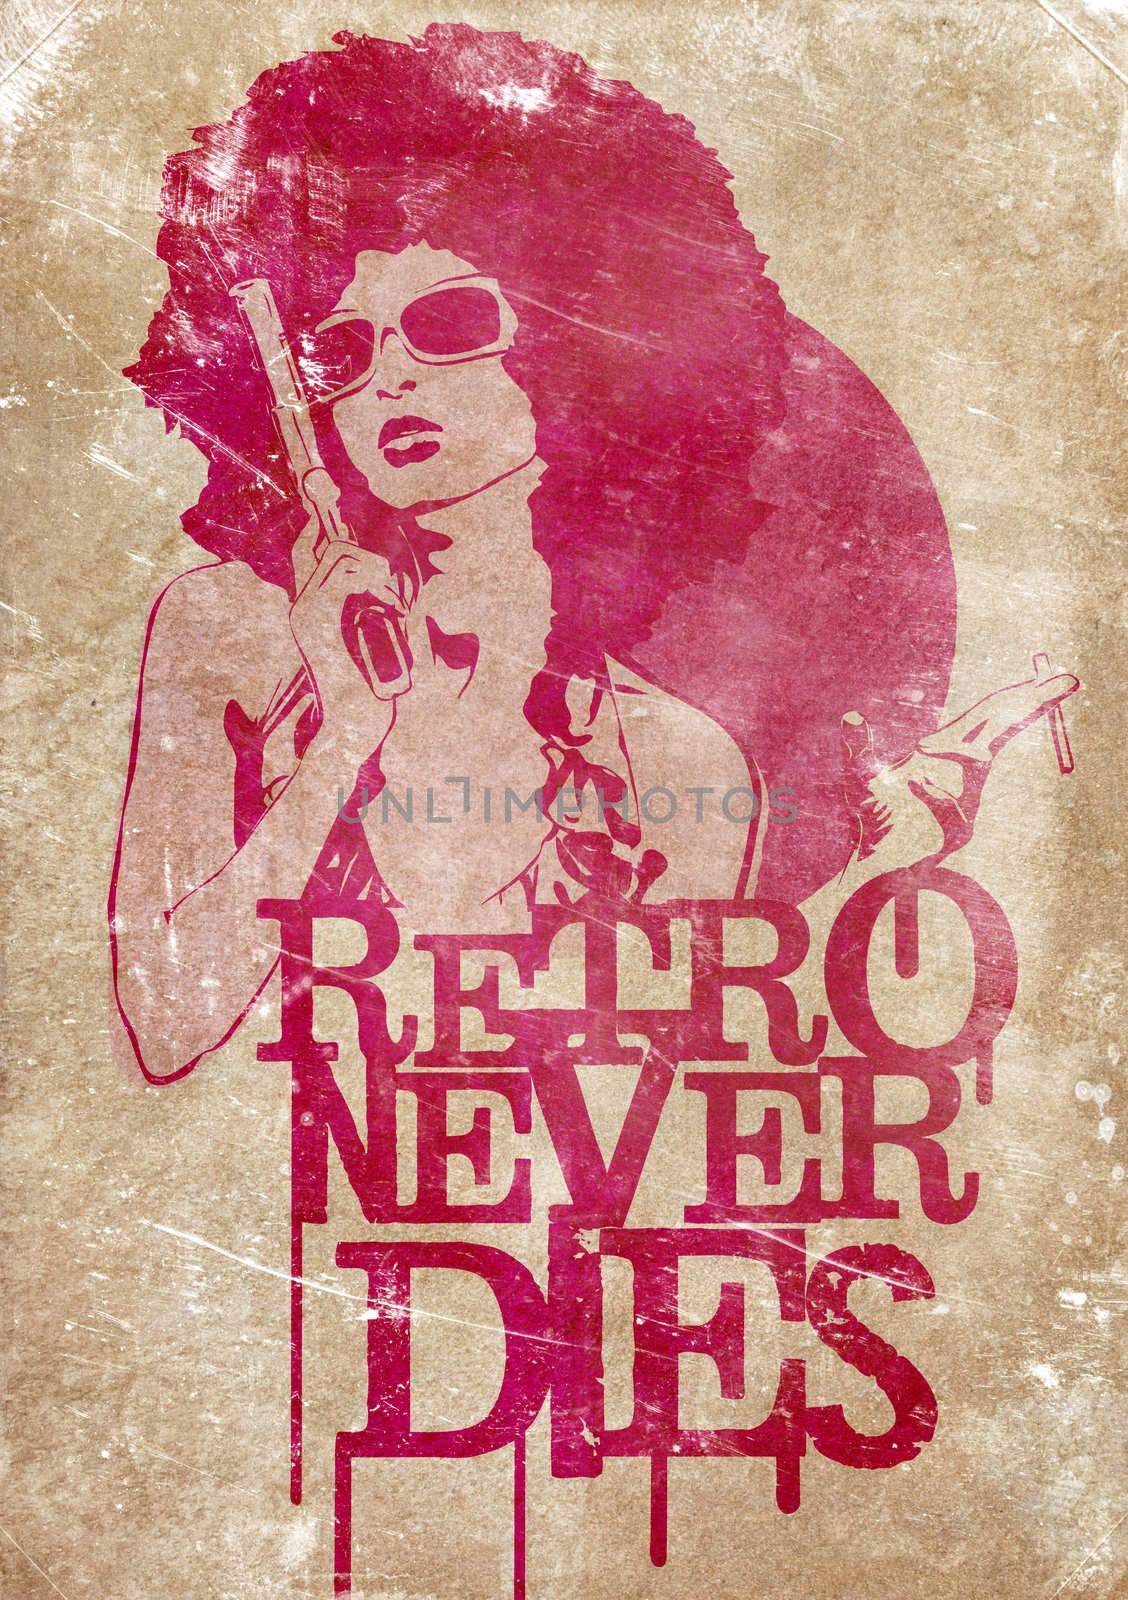 Illustration of a dangerous retro girl holding a gun and a cigarette, on old paper background